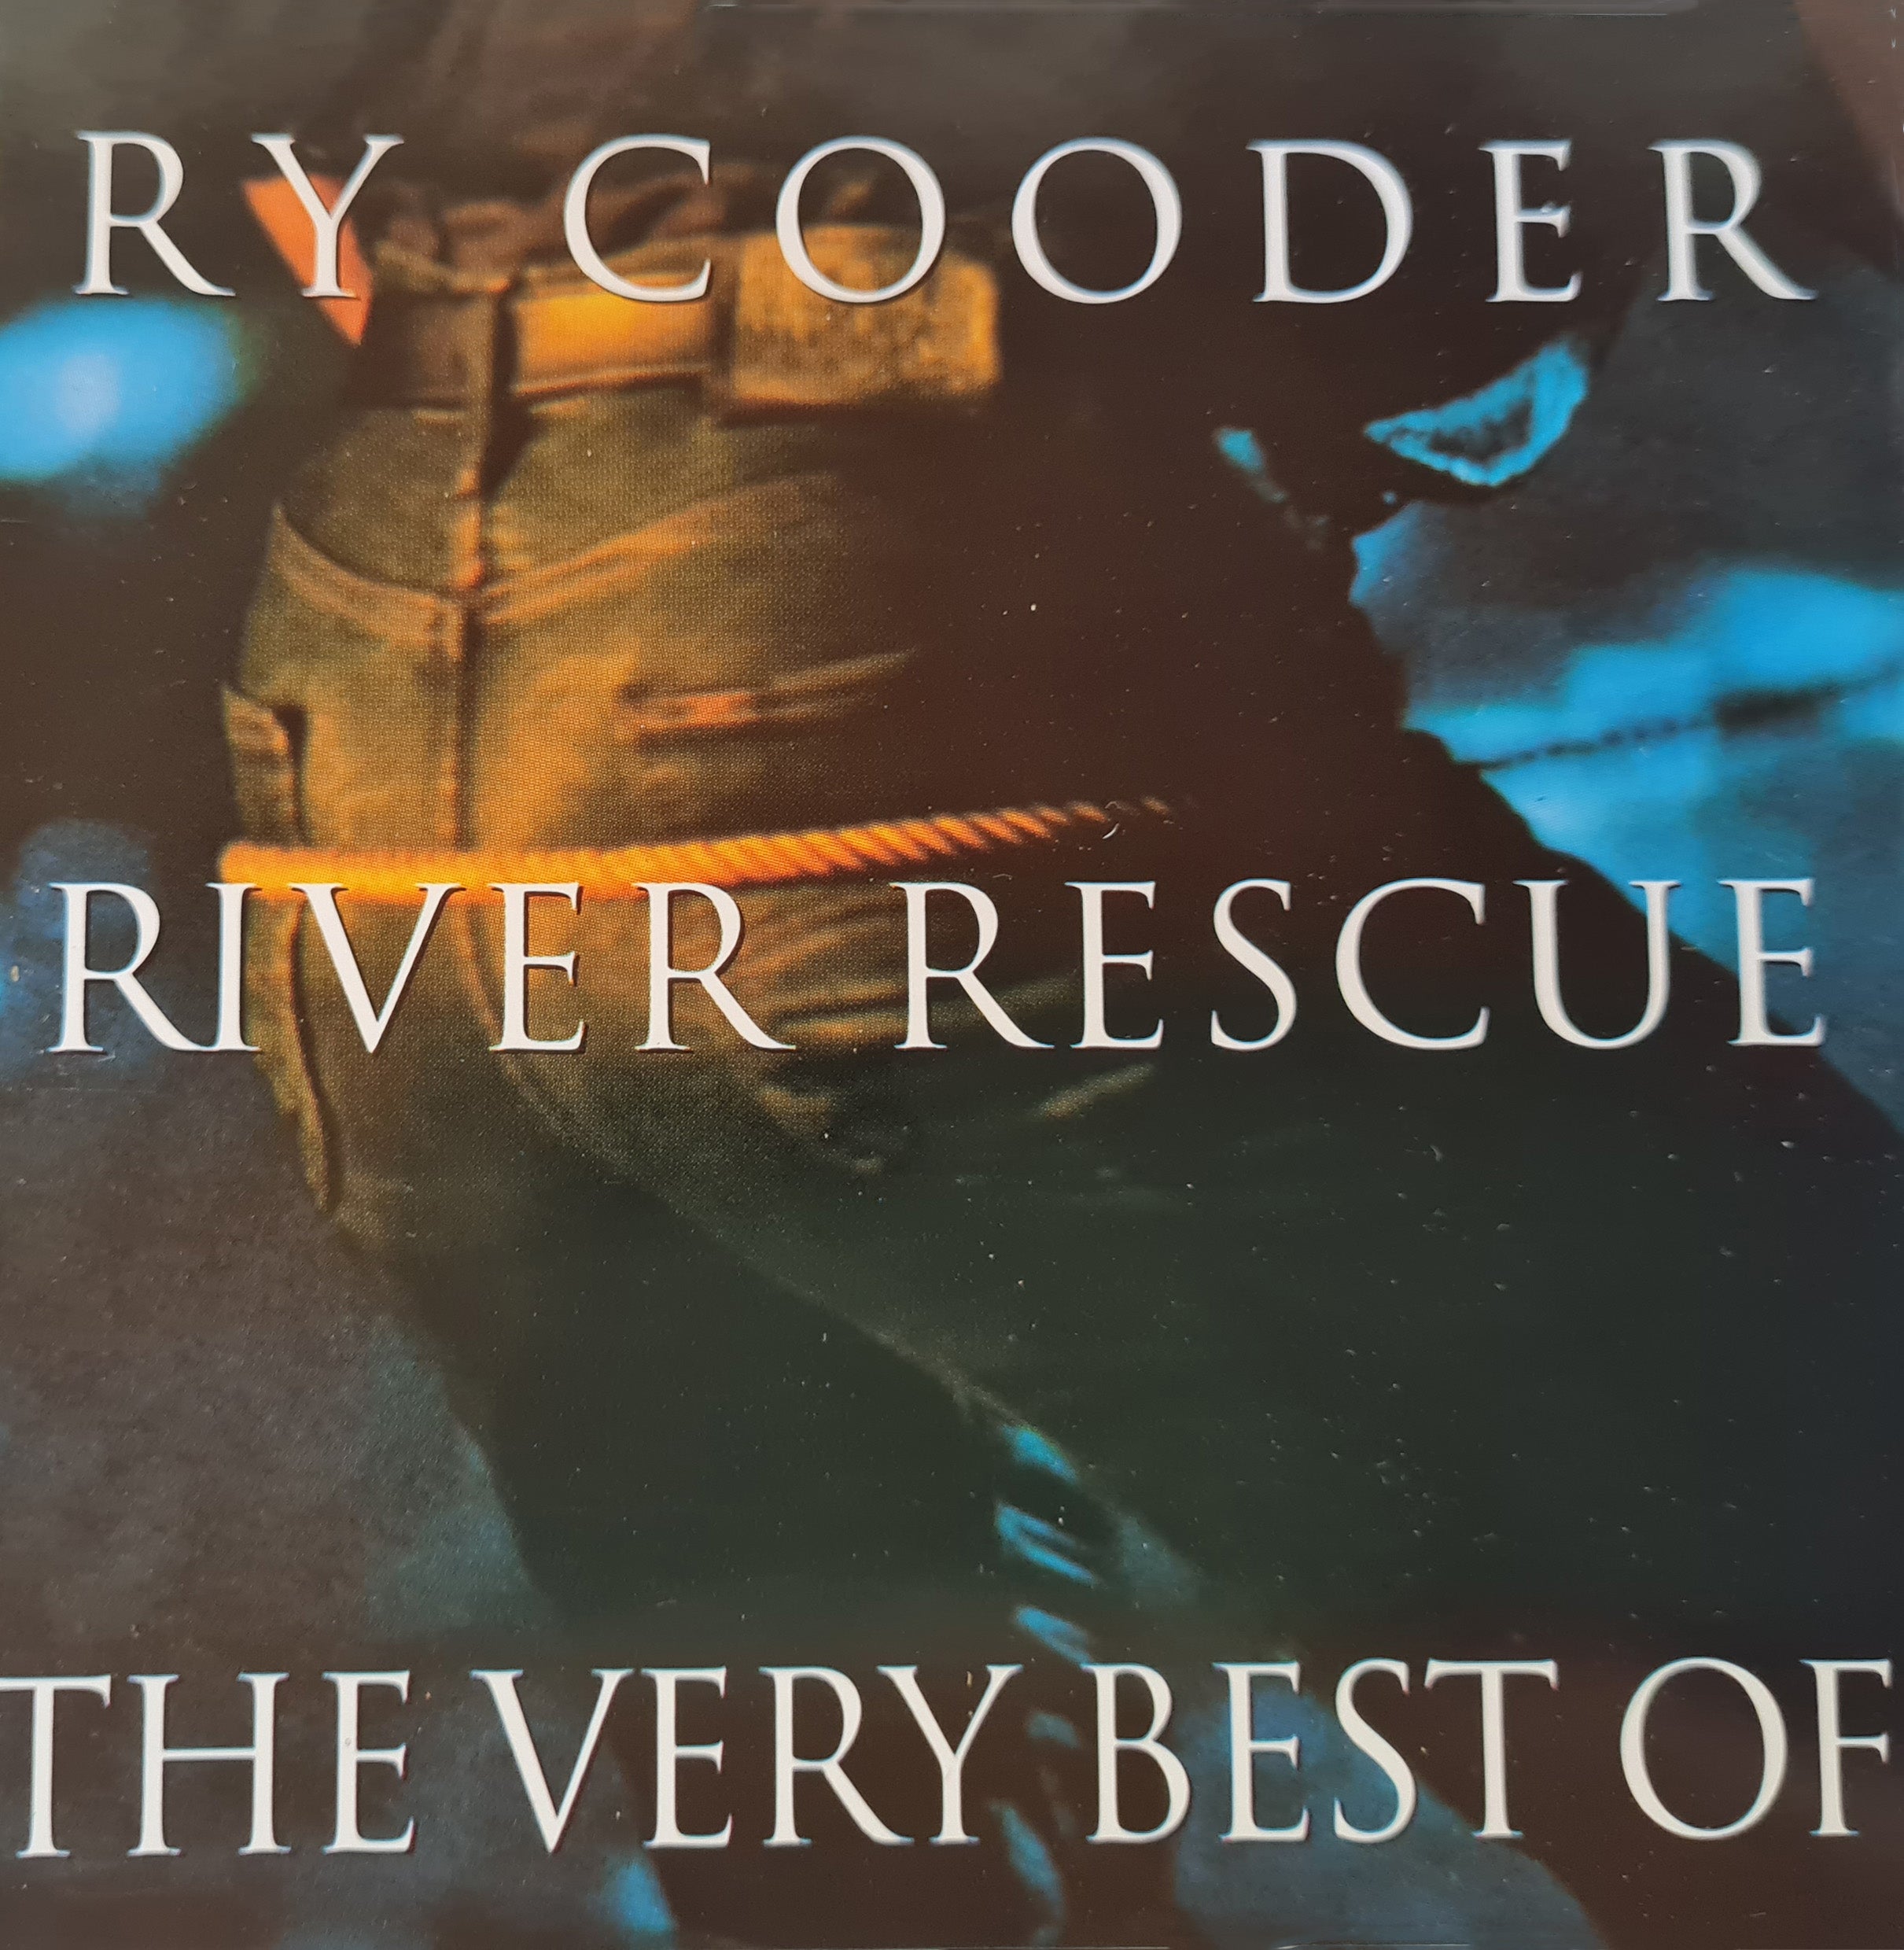 Ry Cooder - River Rescue - The Very Best of (CD)